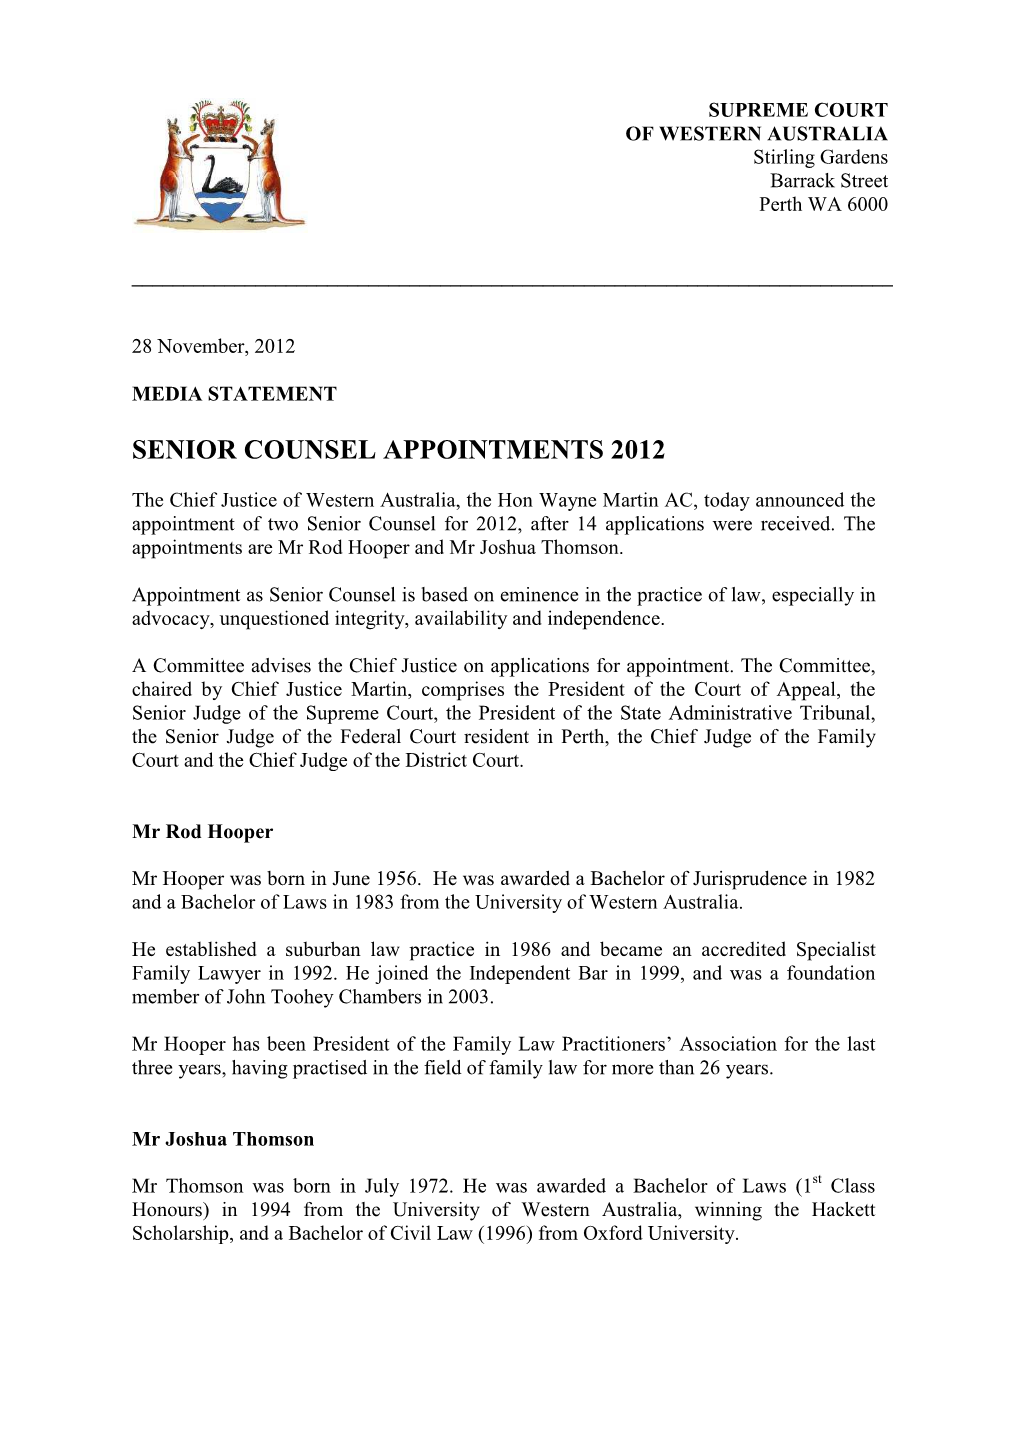 Senior Counsel Appointments 2012